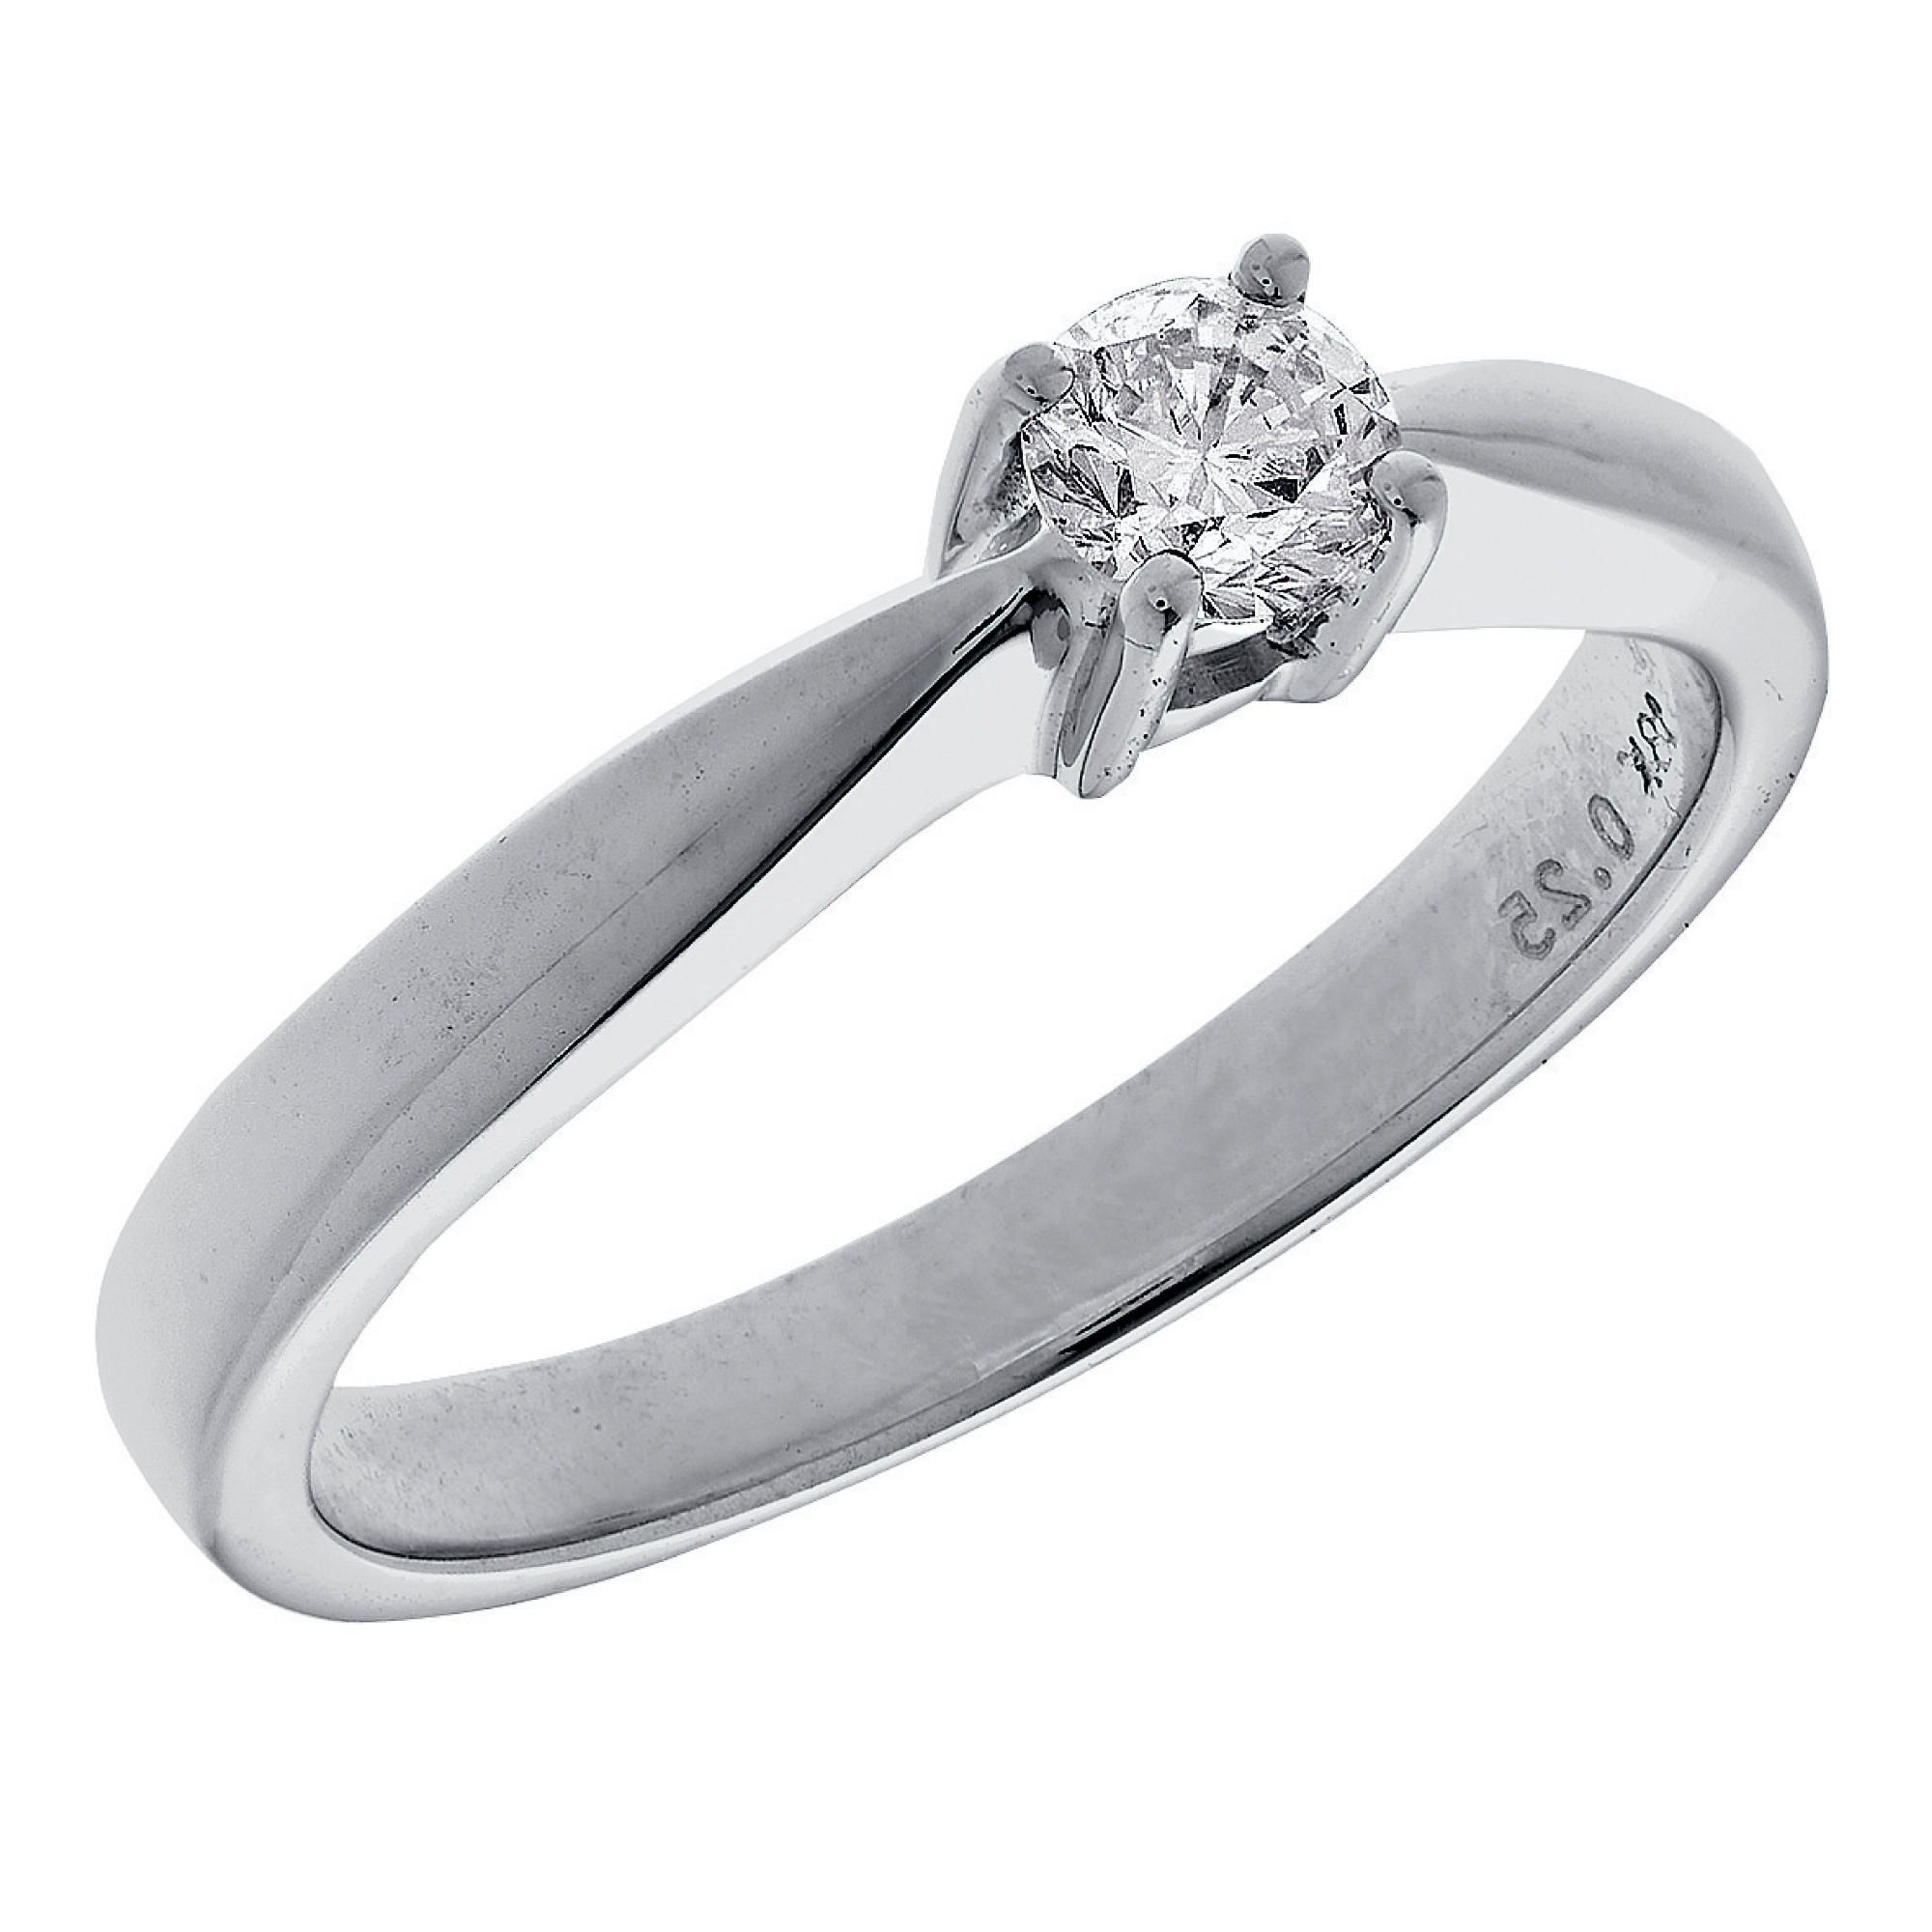 18ct White Gold 25Pt Diamond Solitaire Ring, L at Tesco Direct